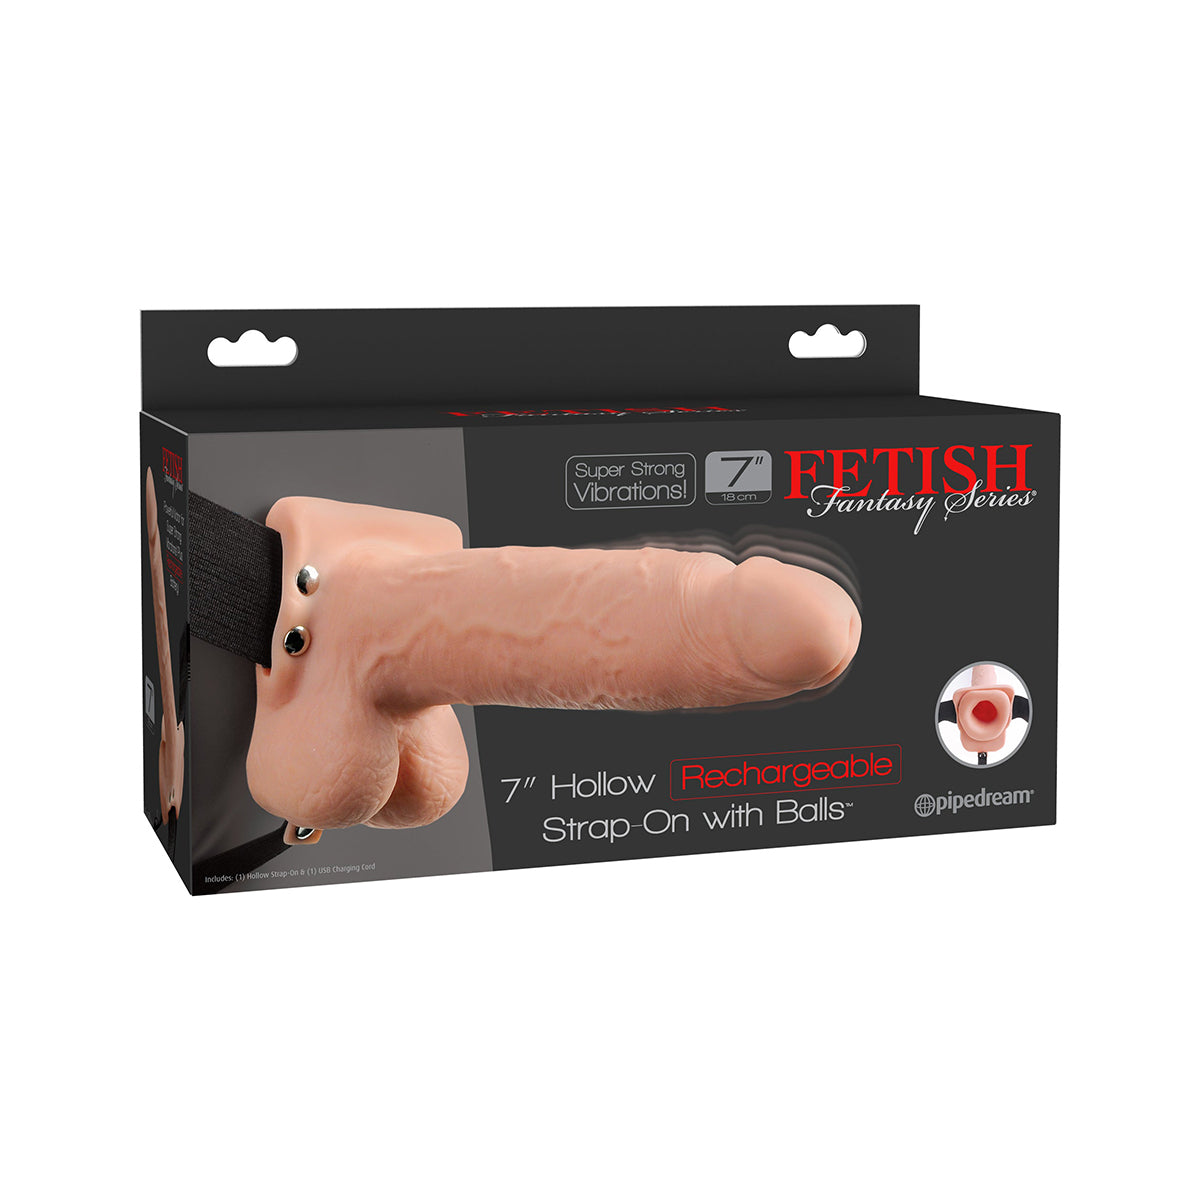 Fetish Fantasy 7" Hollow Rechargeable Strap-On with Balls - Flesh - Thorn & Feather